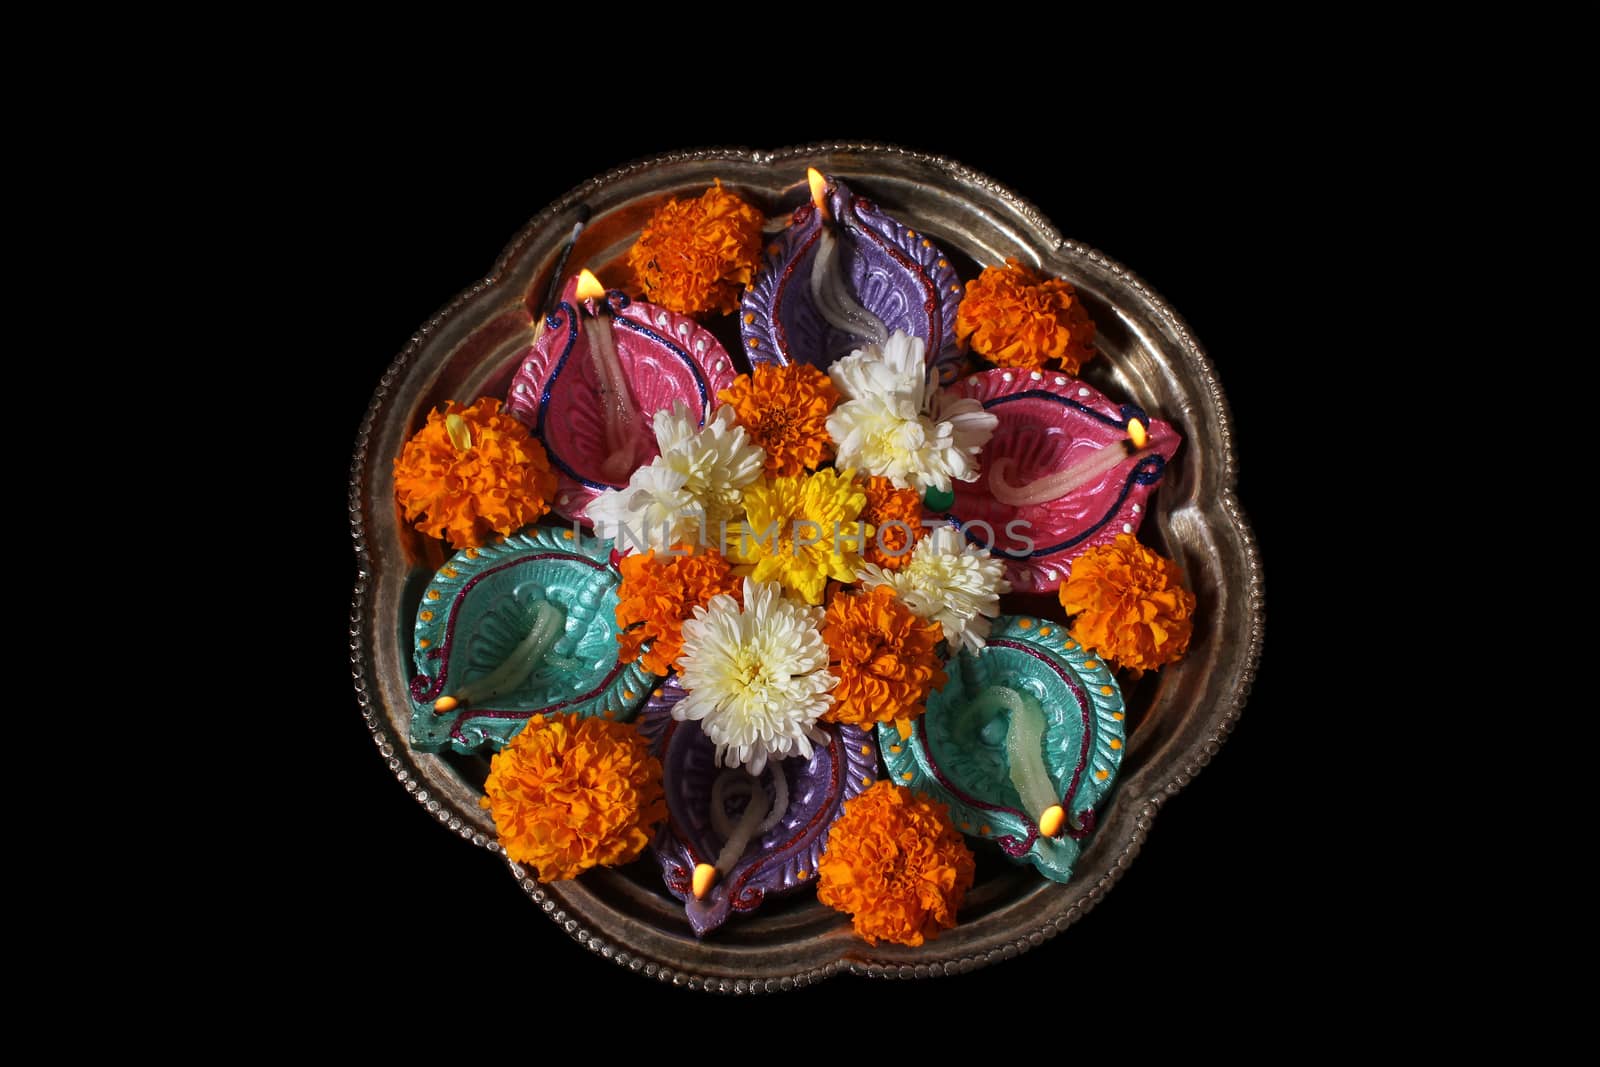 A plate used for traditional hindu rituals with lamps and flowers during Diwali festival in India.